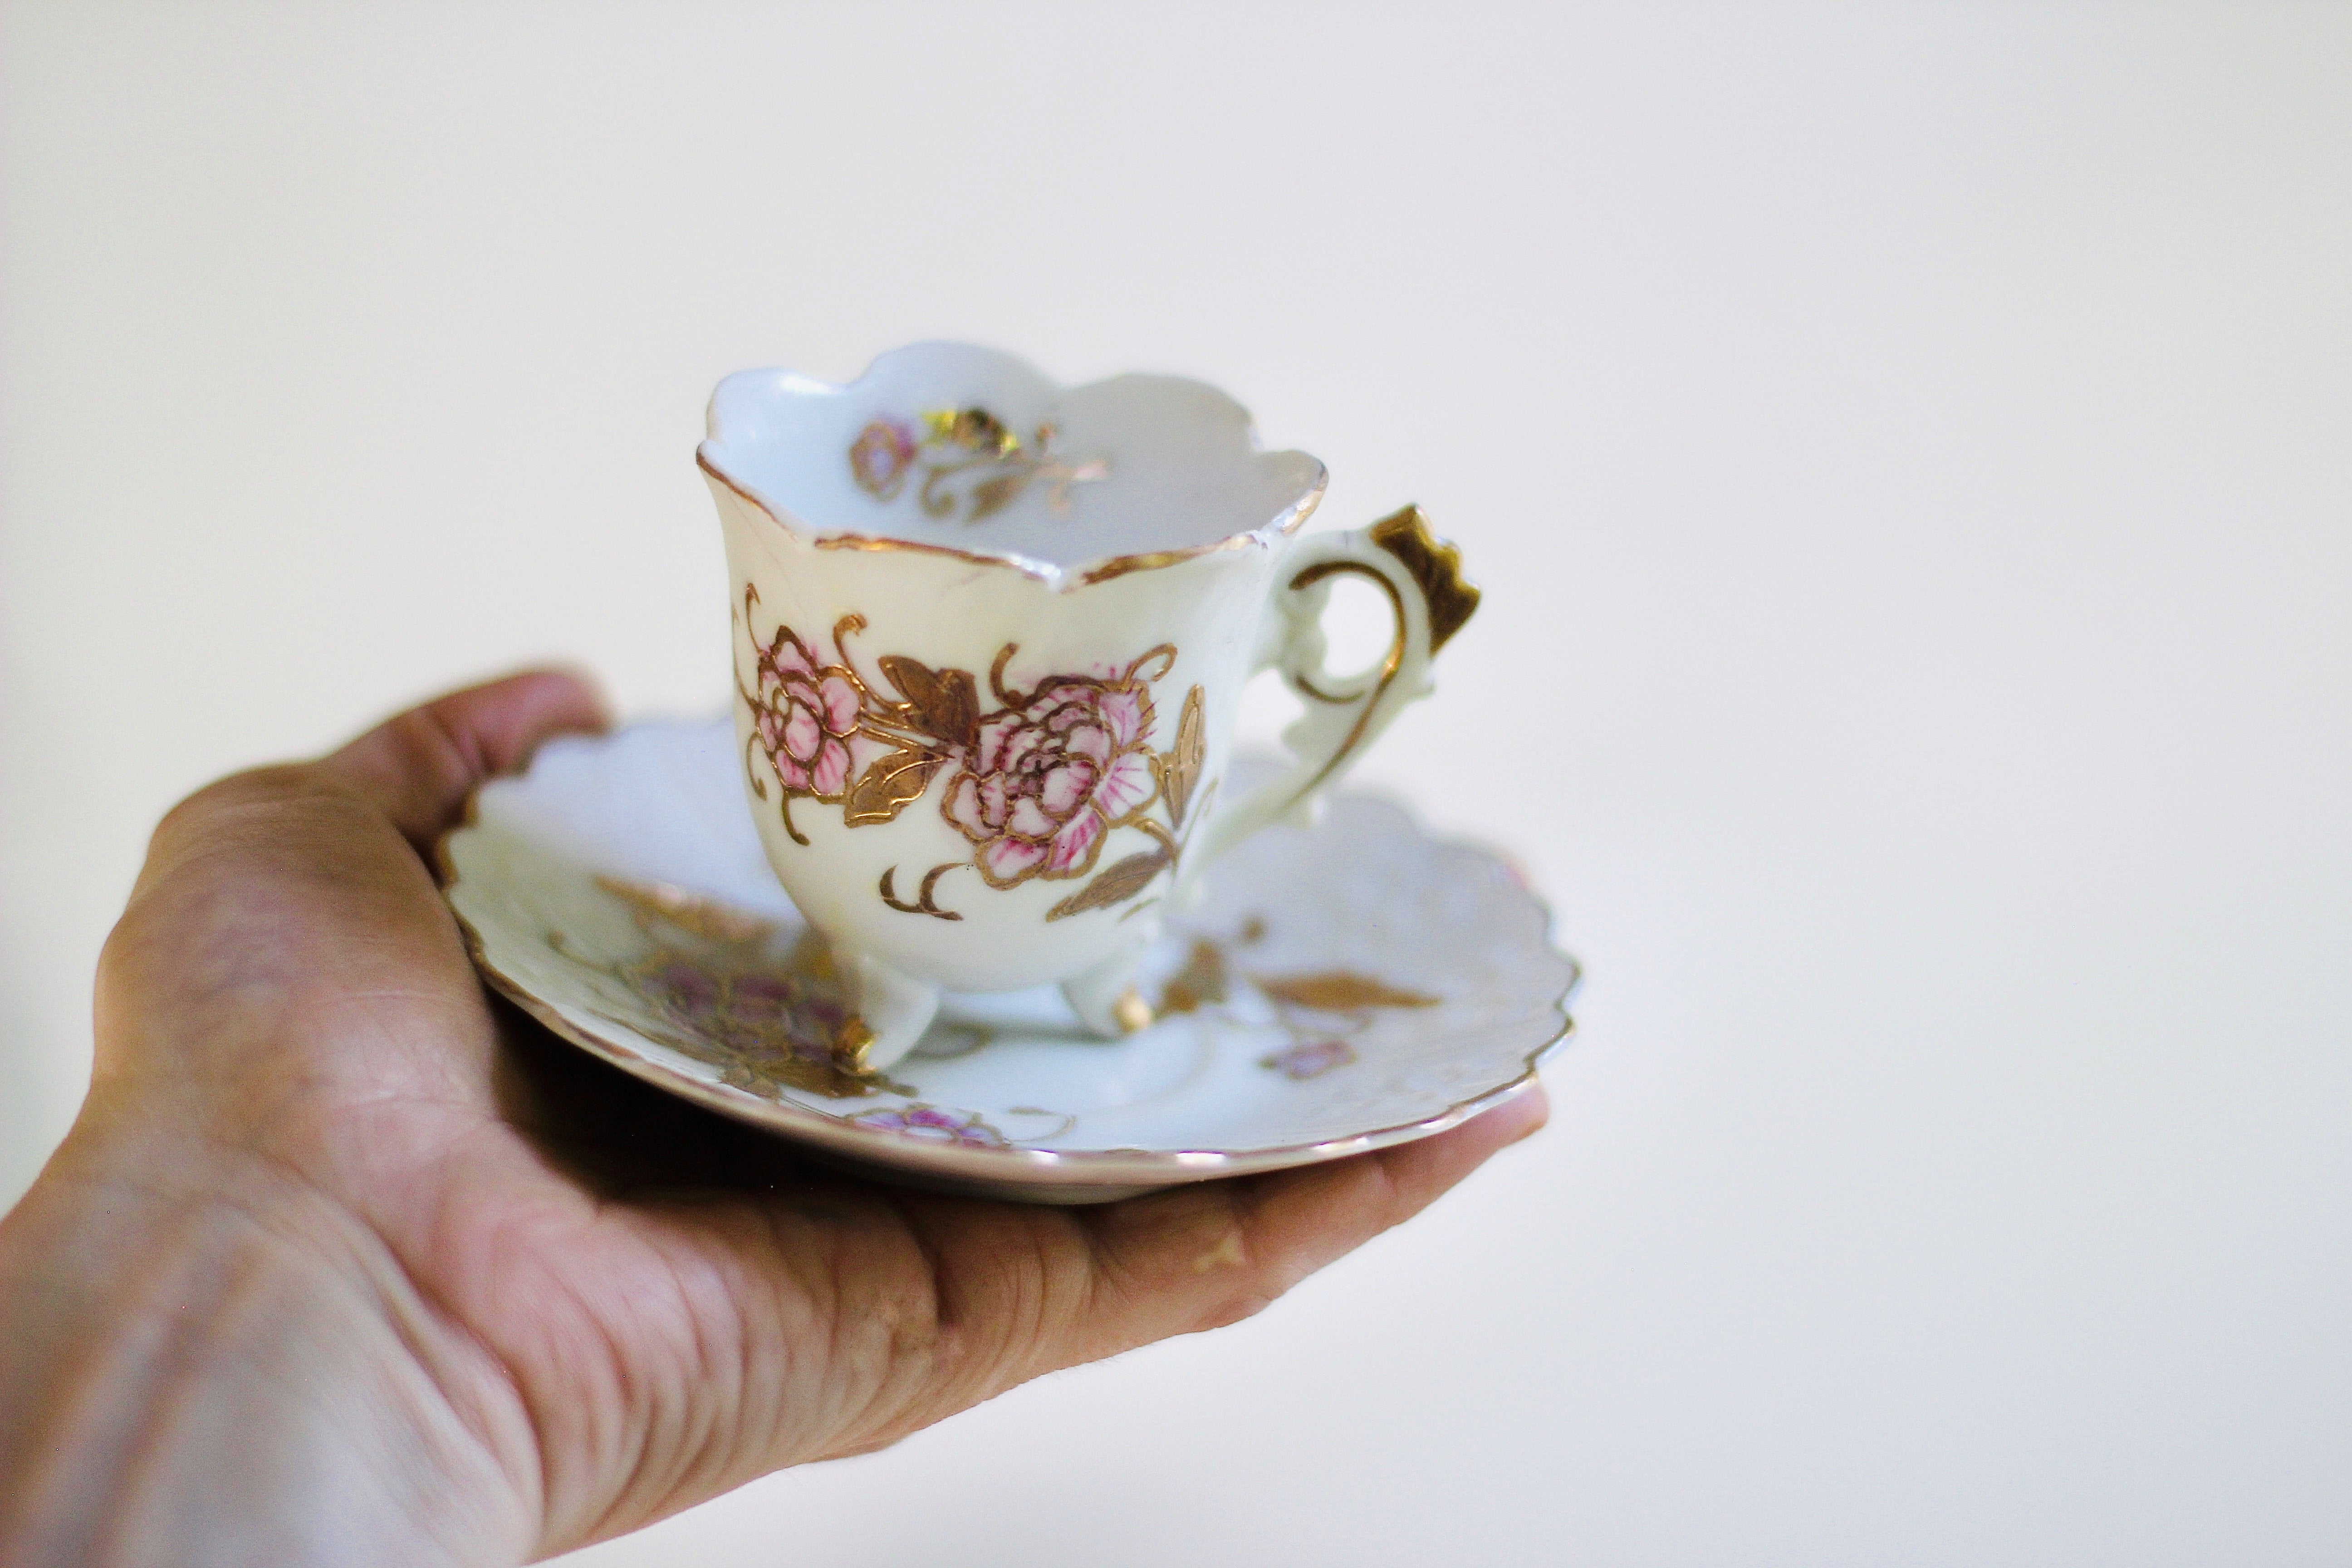 Antique Pink Gold Flowers Tea Cup